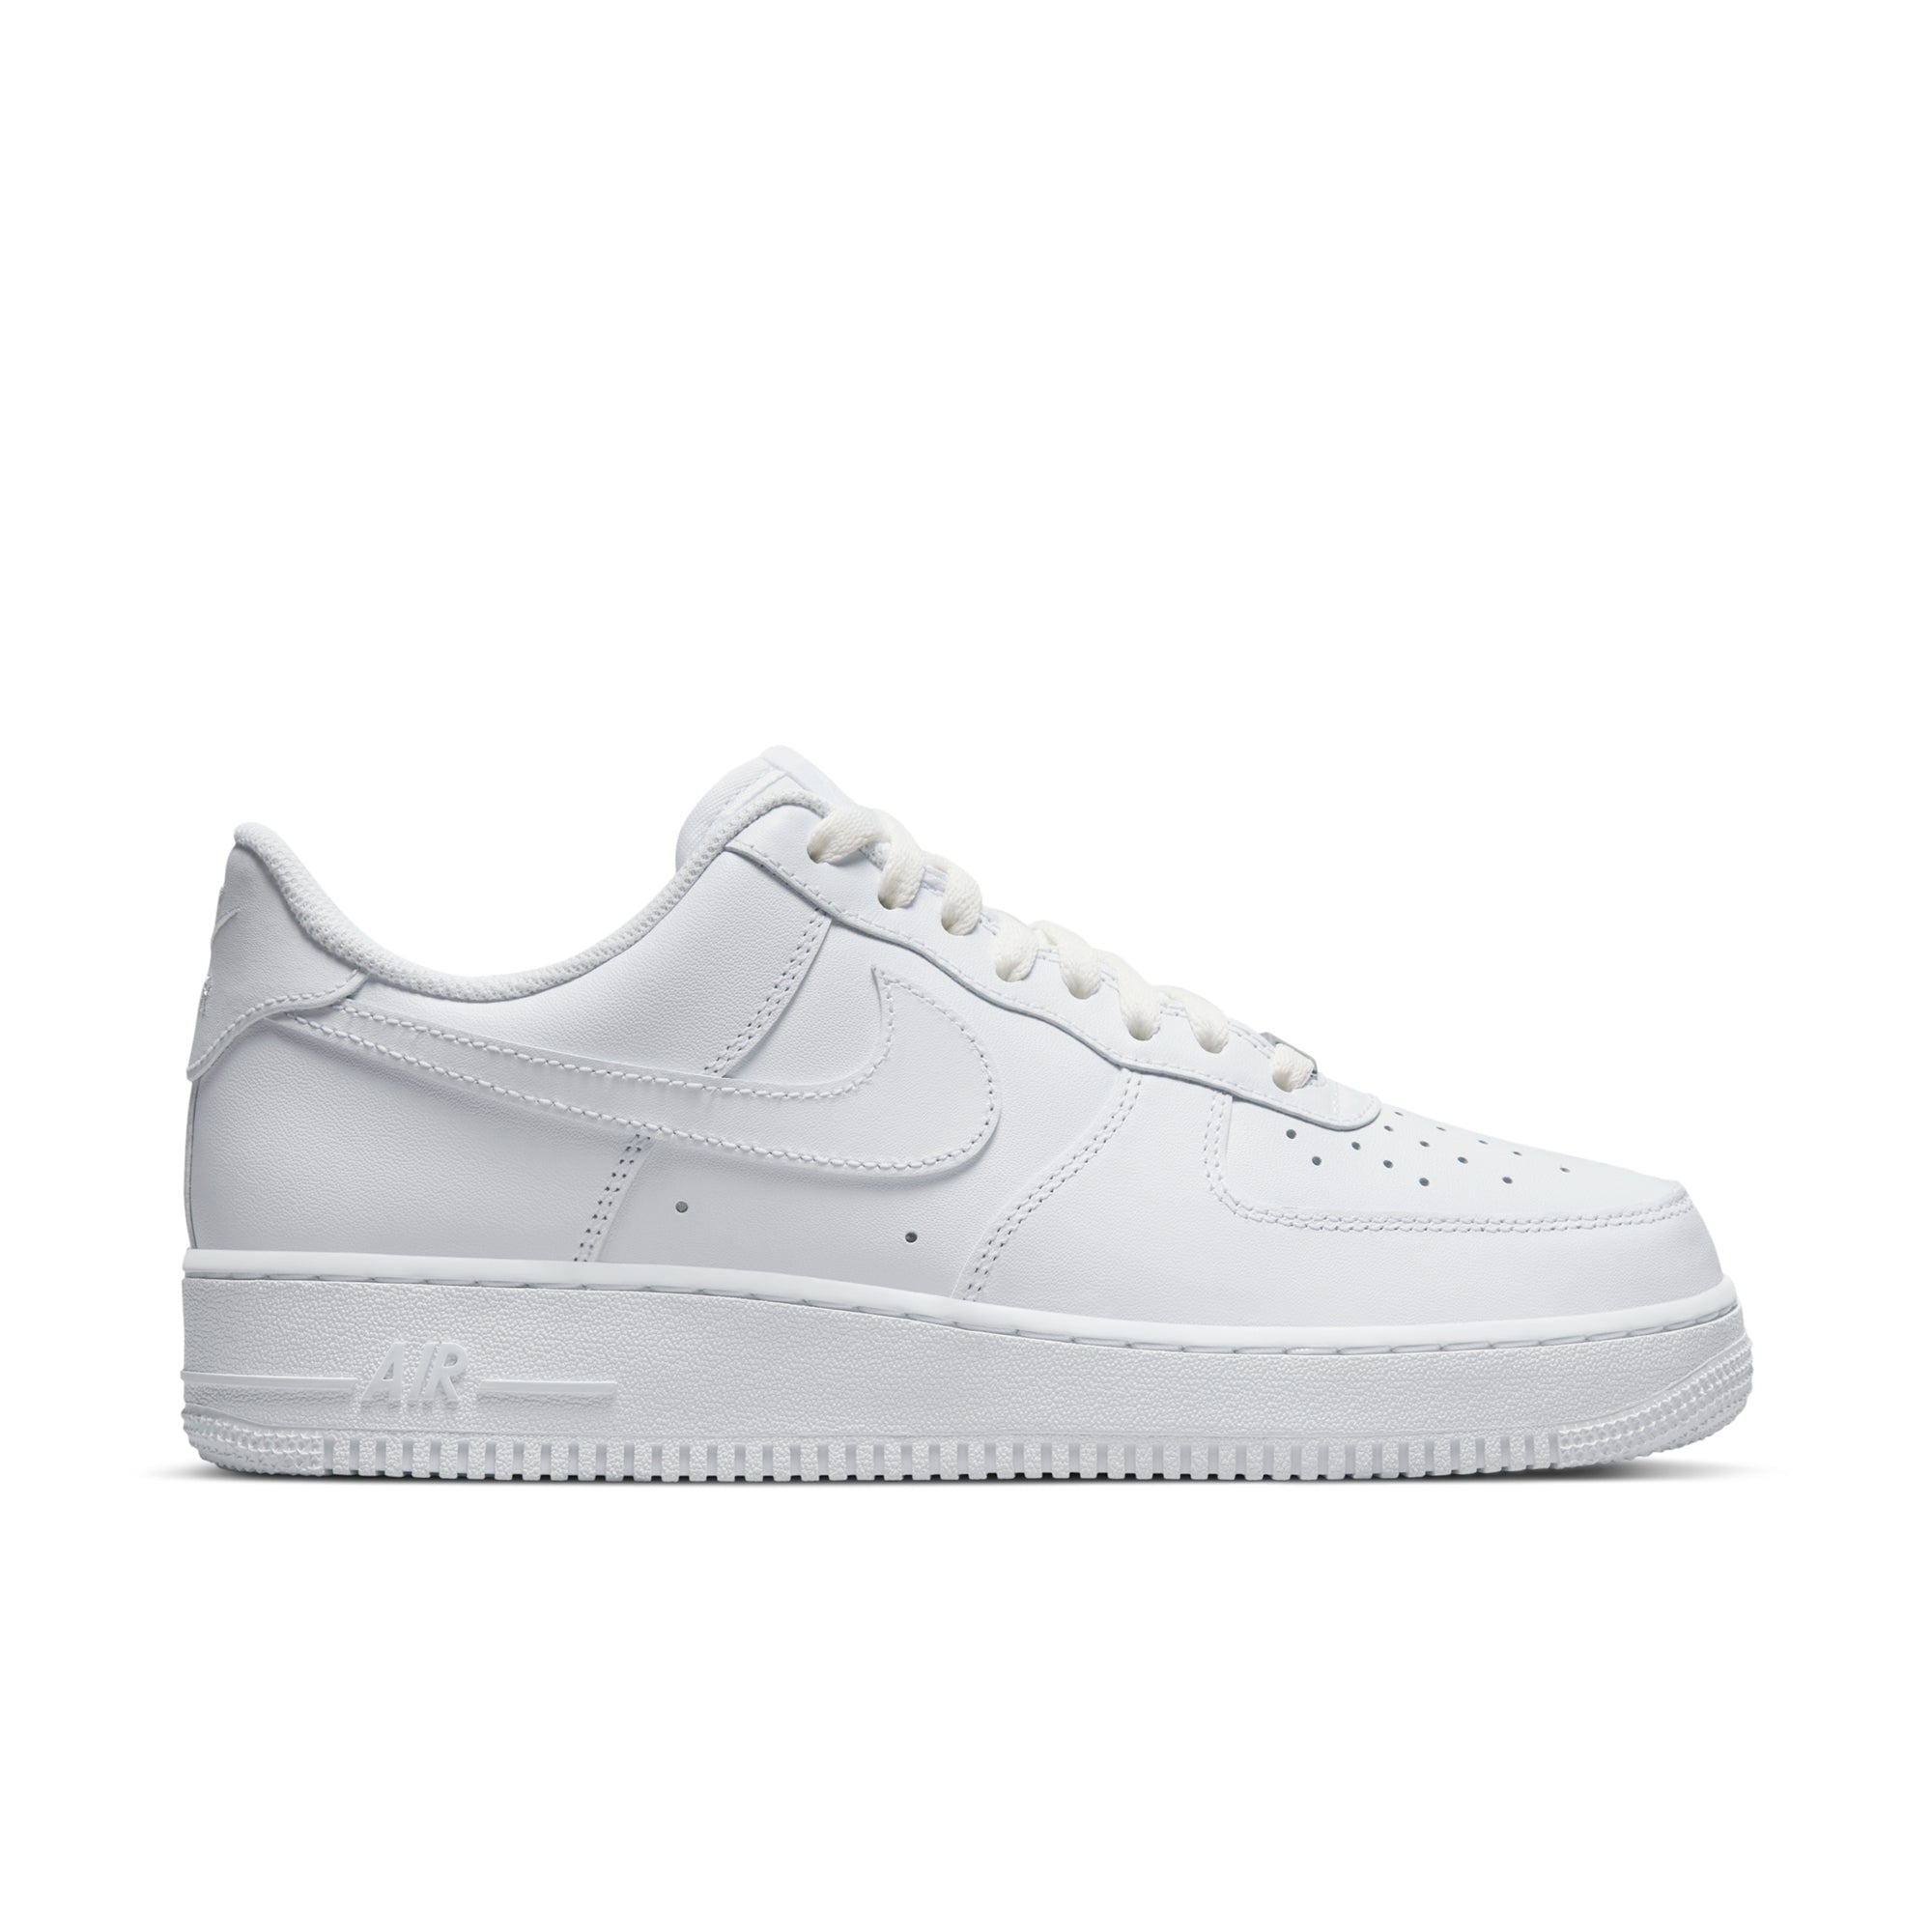 nike air force 1 high 07 wb Nike Air Force 1 Low '07 White | CW2288-111 42.5 - Livrare express 24 ore